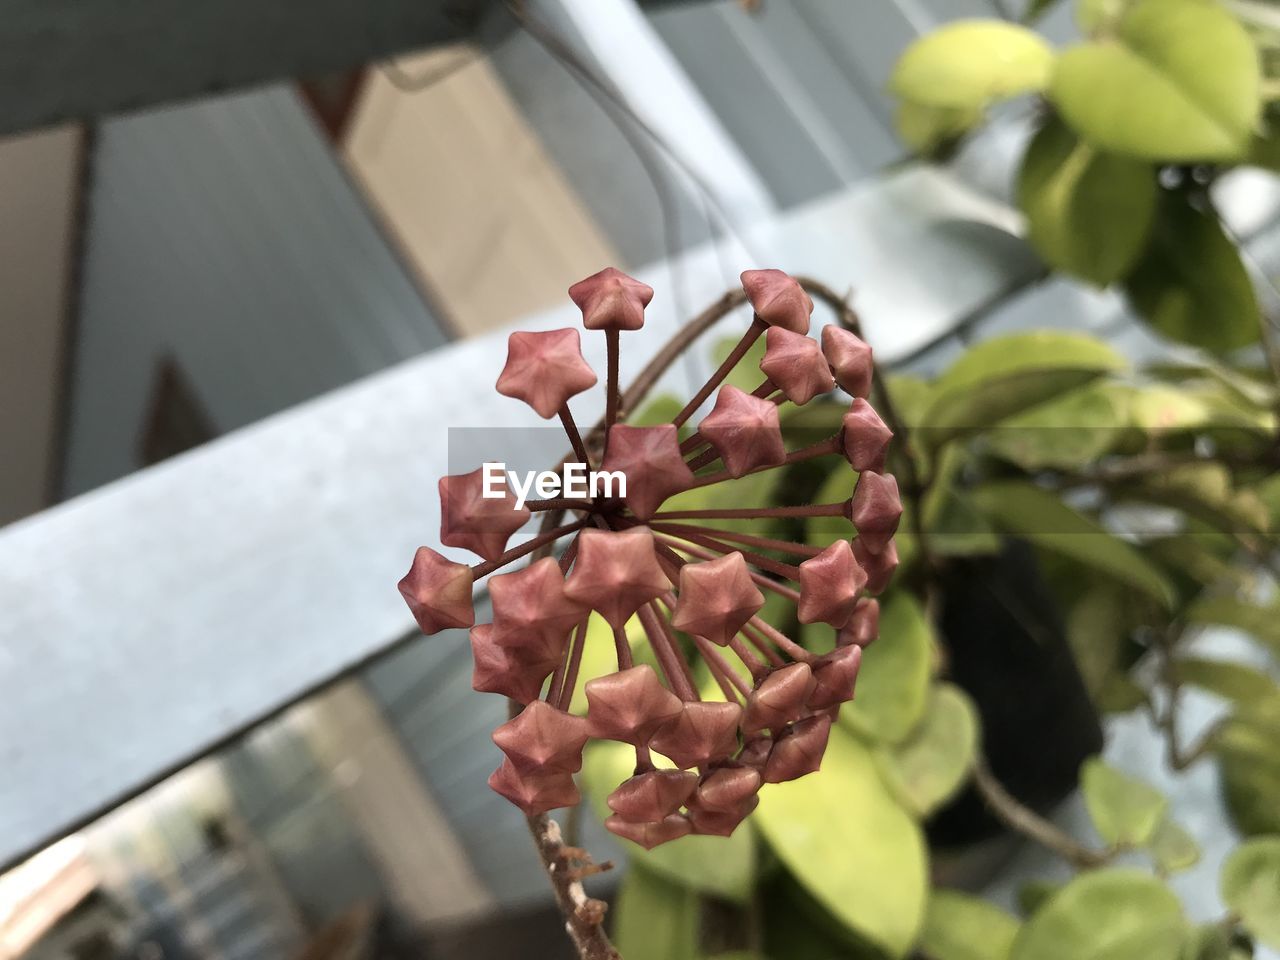 plant, growth, flower, nature, freshness, flowering plant, spring, beauty in nature, produce, close-up, leaf, plant part, focus on foreground, branch, day, outdoors, food and drink, fruit, food, blossom, no people, healthy eating, tree, architecture, agriculture, fragility, selective focus